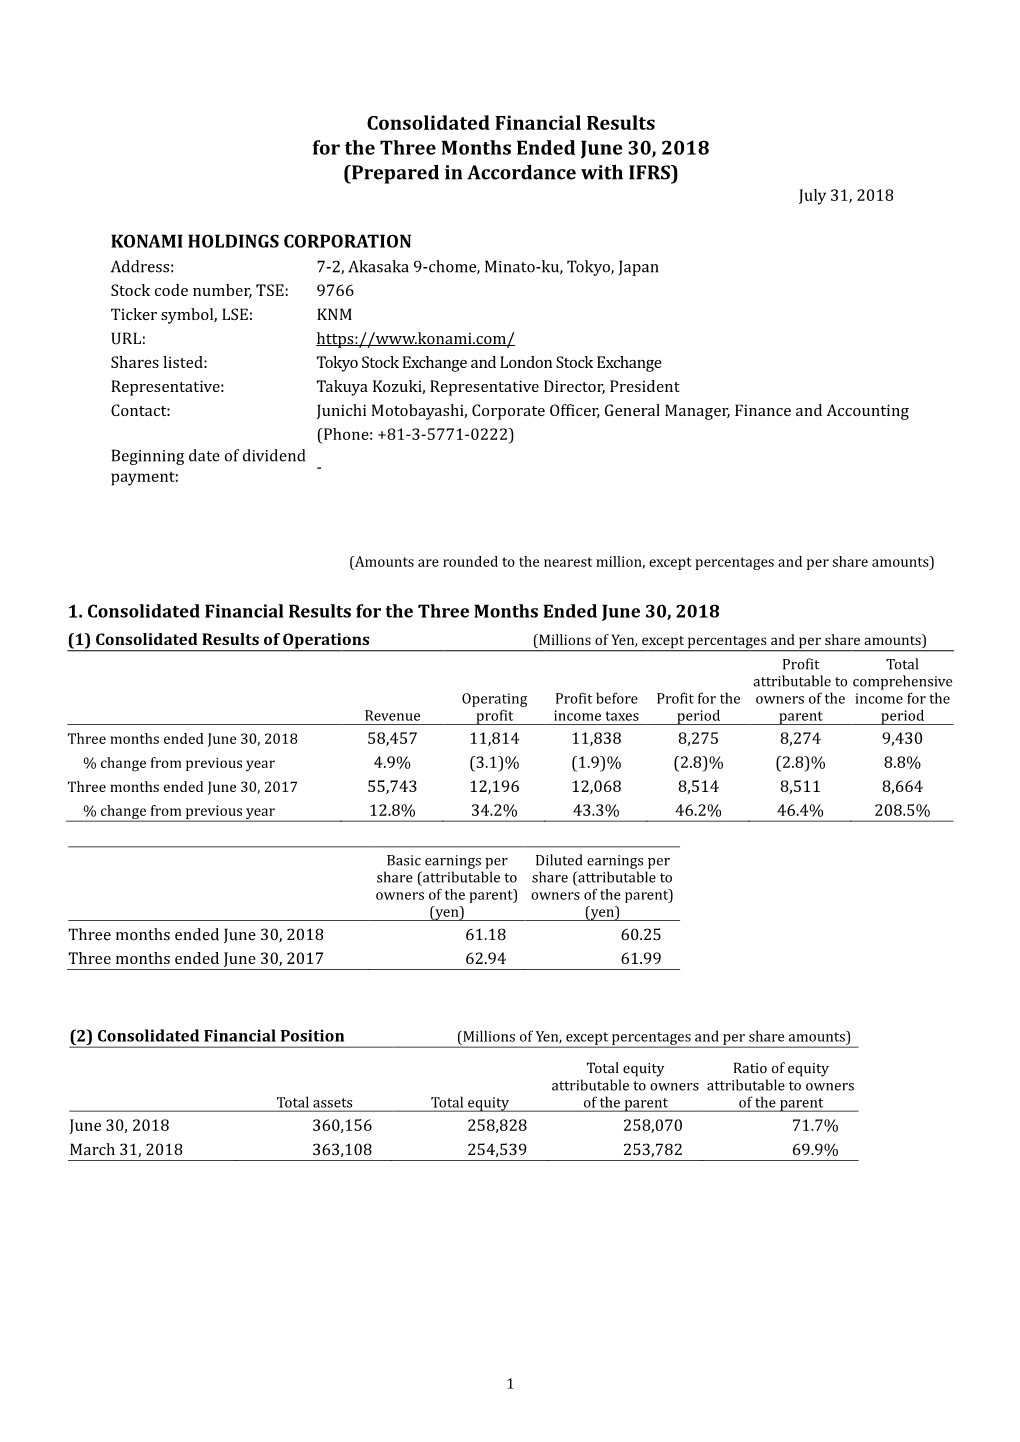 1Q FY2019 Consolidated Financial Results